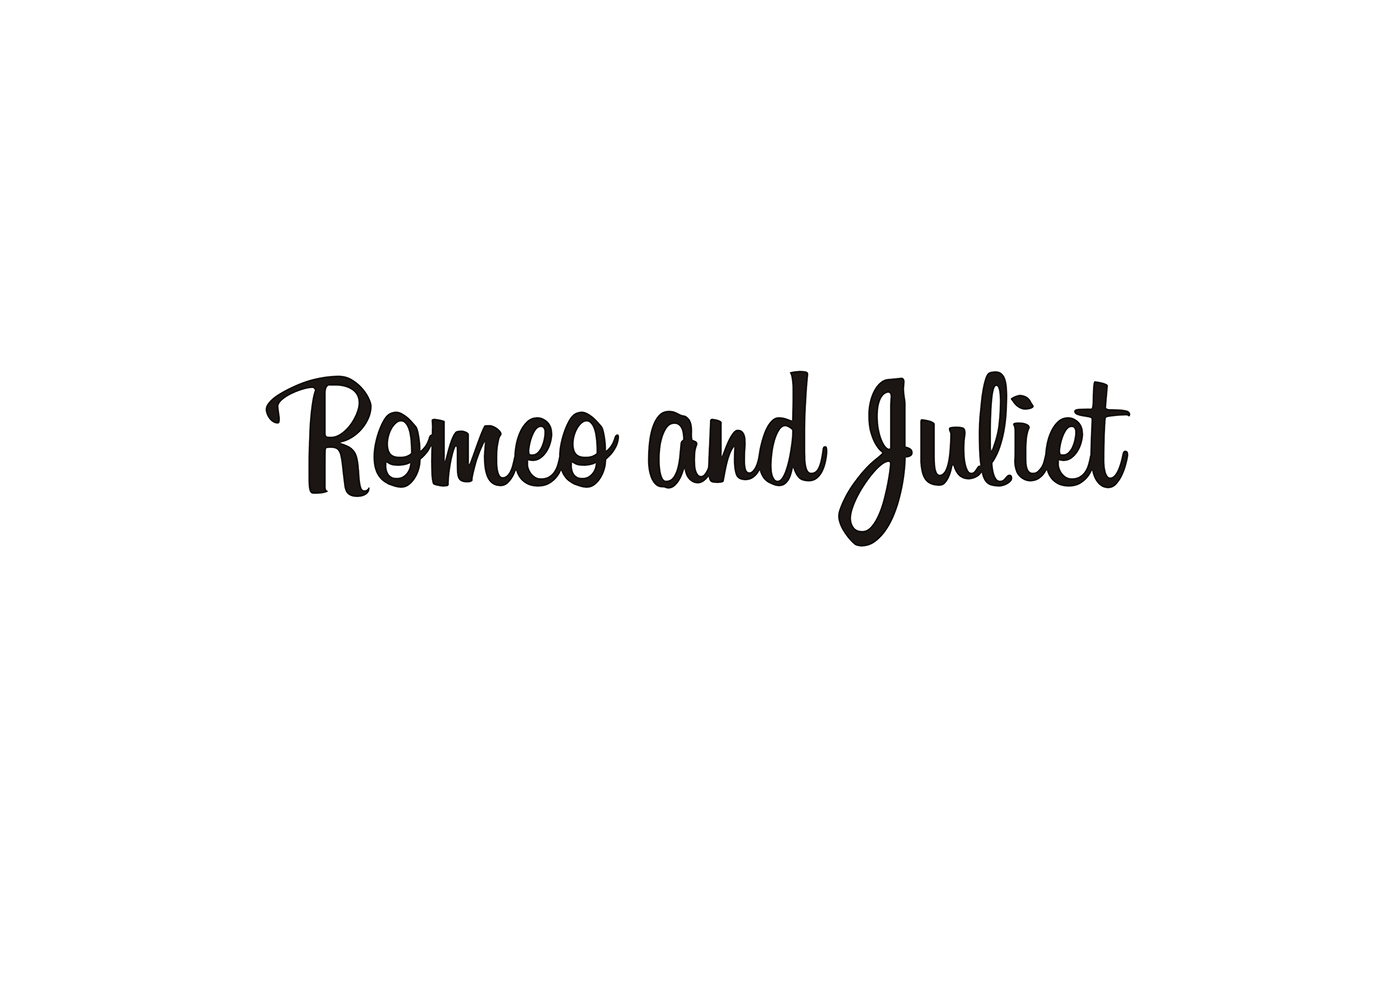 cover book graphic ILLUSTRATION  design Romeo and Juliet shakespeare